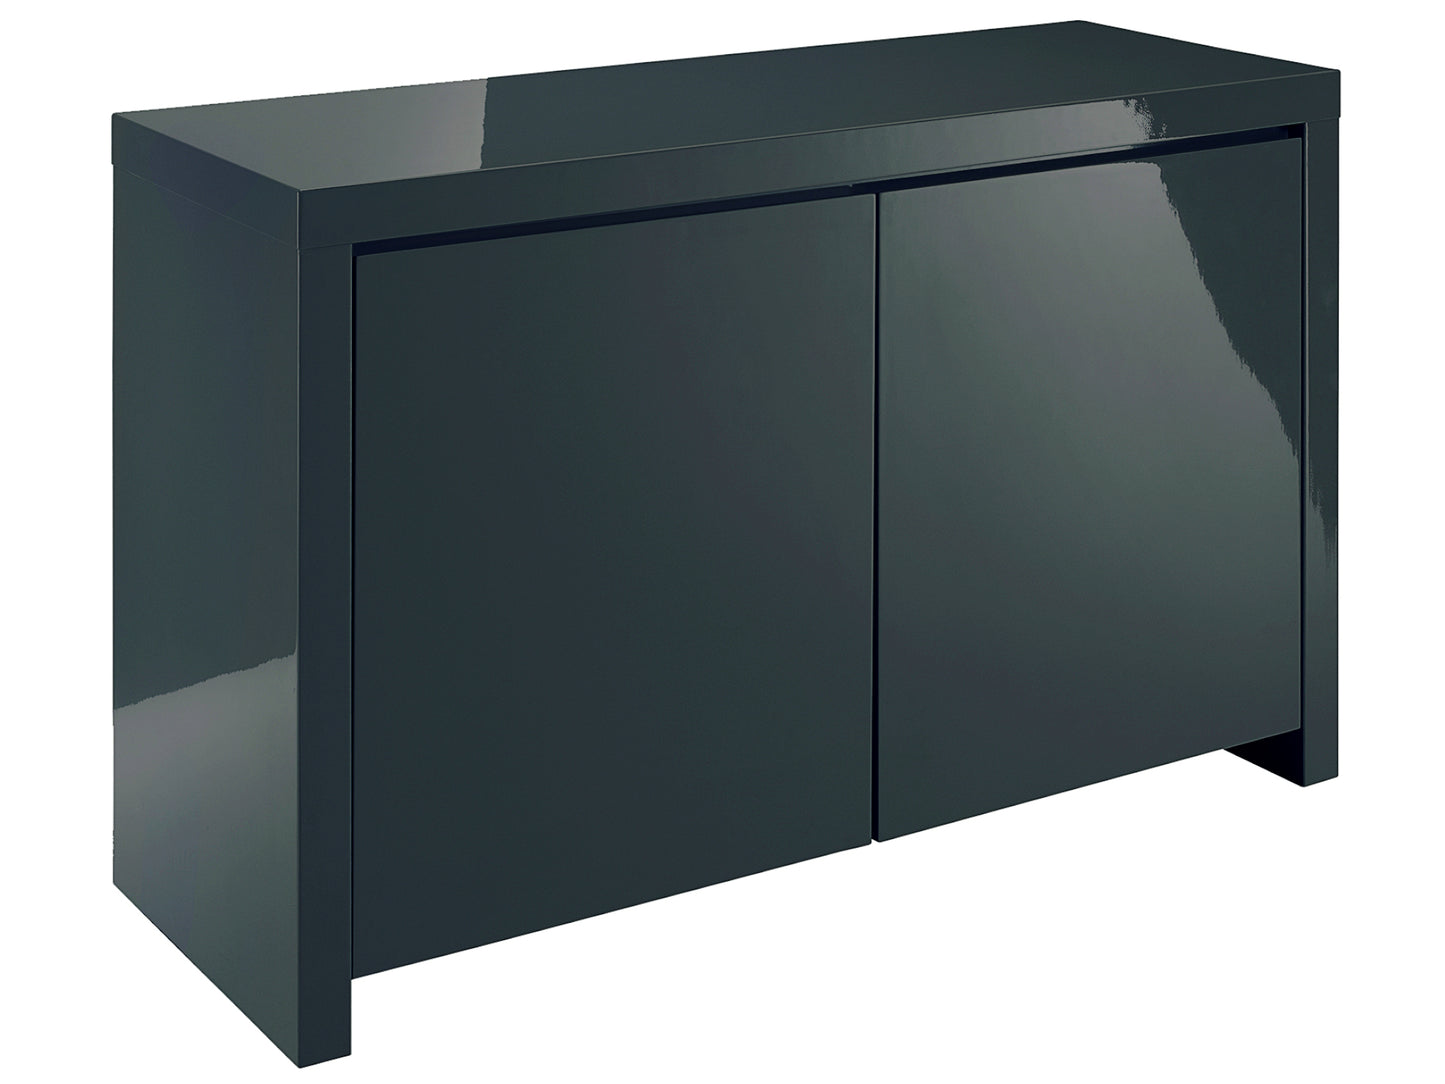 Puro Sideboard in Charcoal